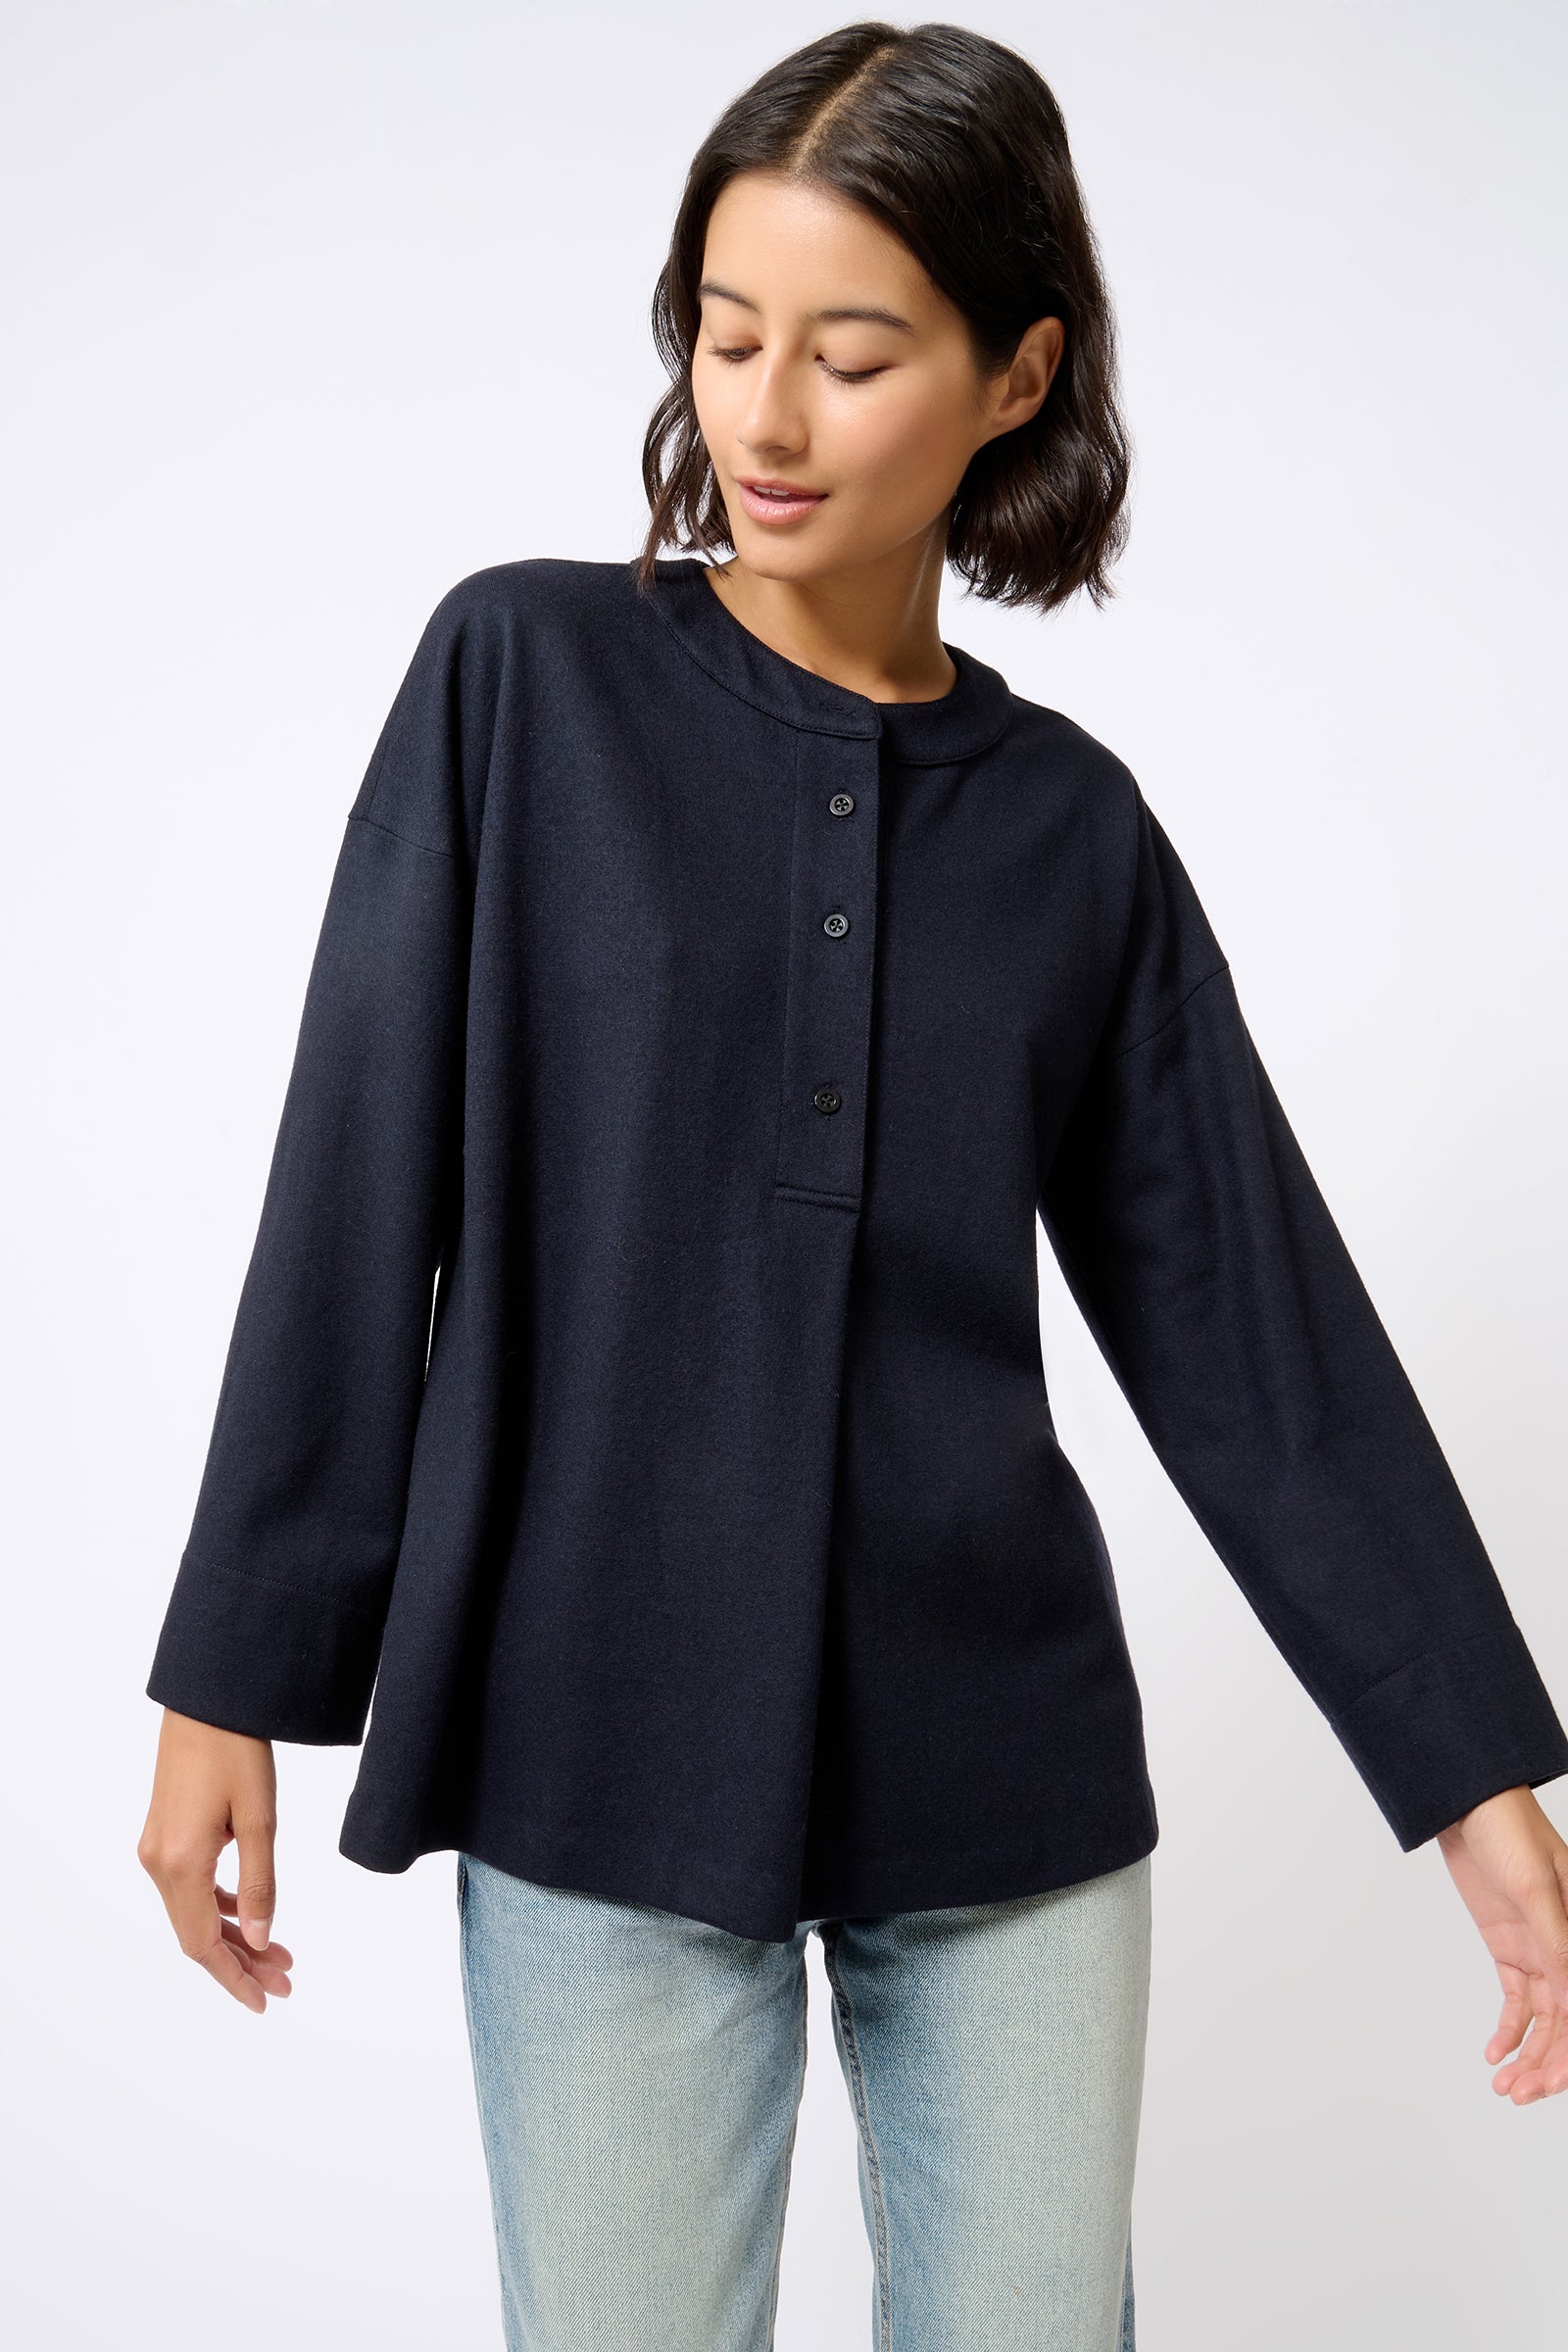 Kal Rieman Band Collar Top in Midnight on Model Looking Down Front View